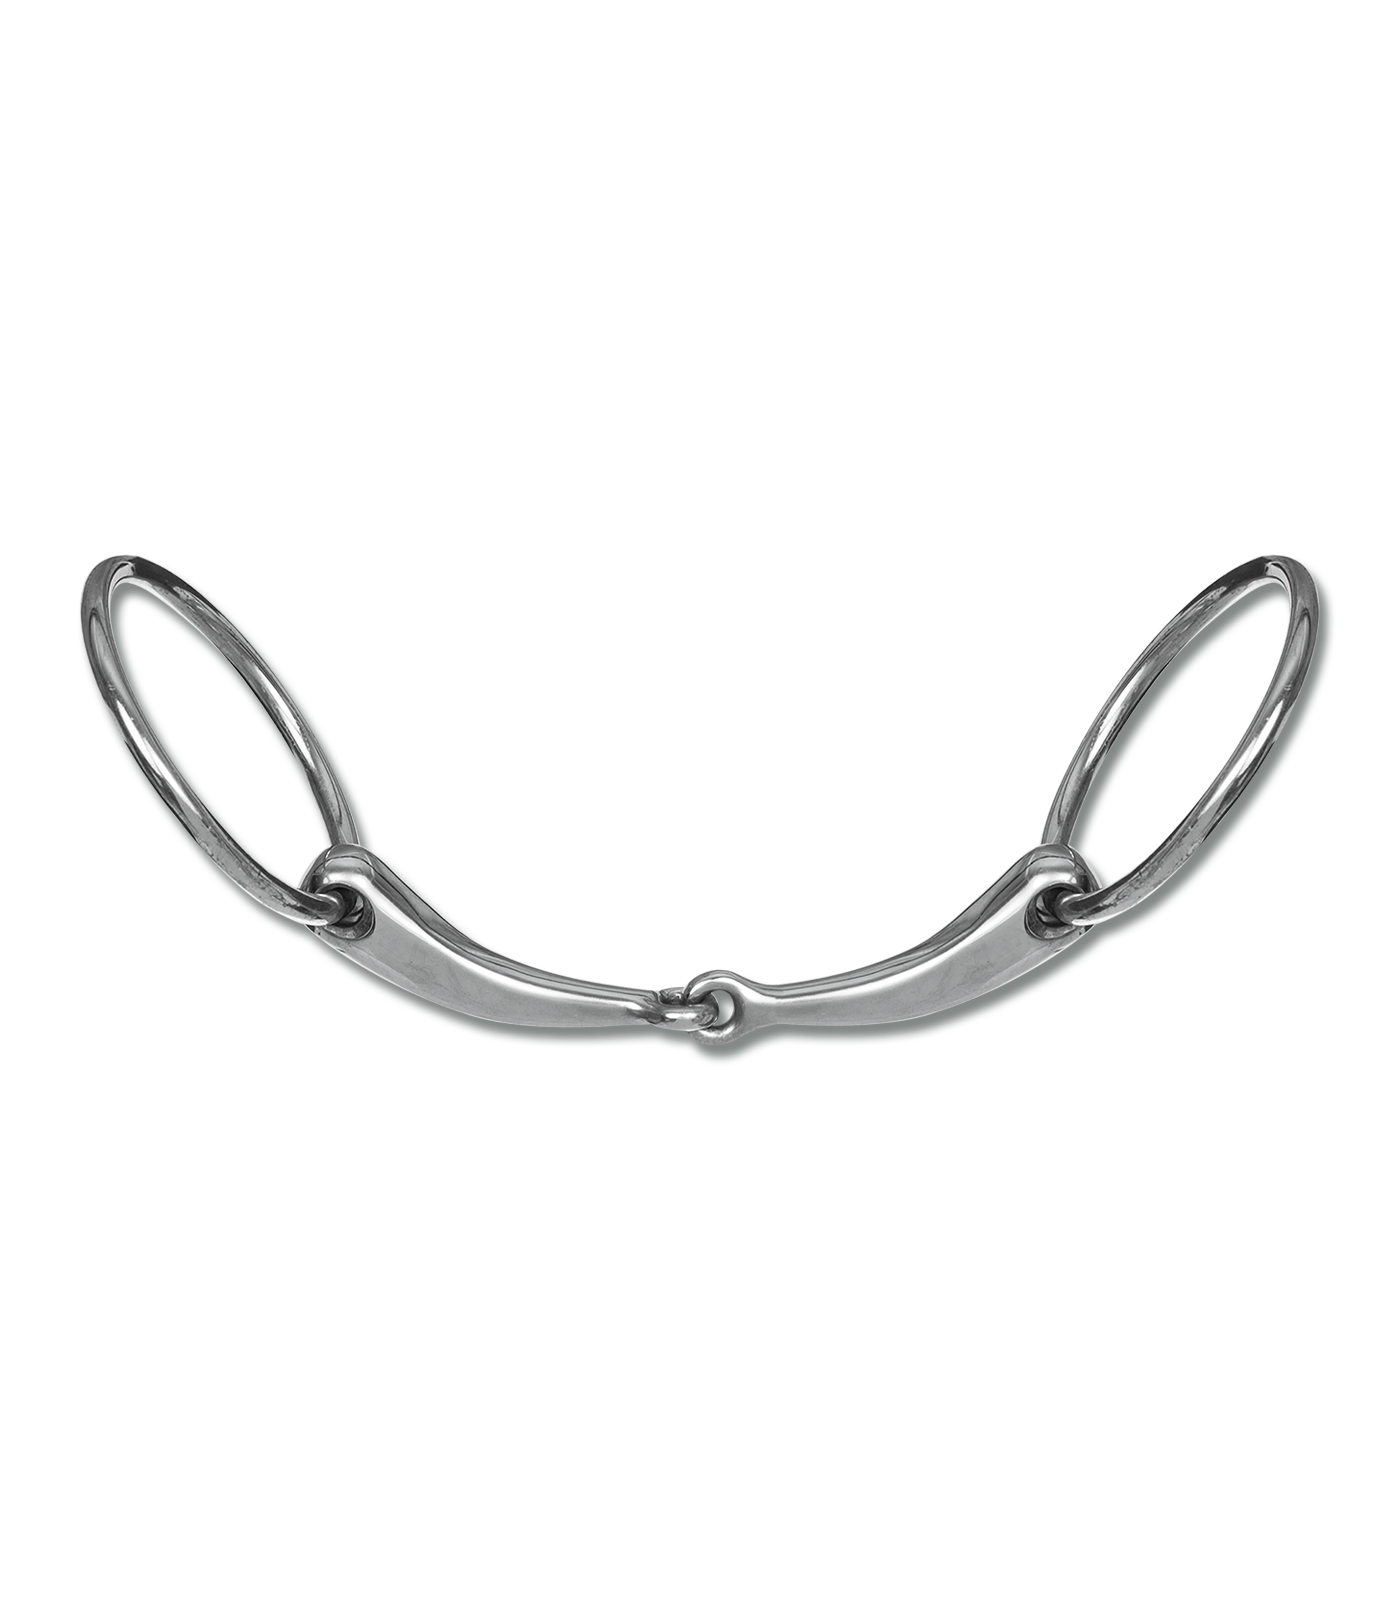 Anatomical snaffle bit, solid